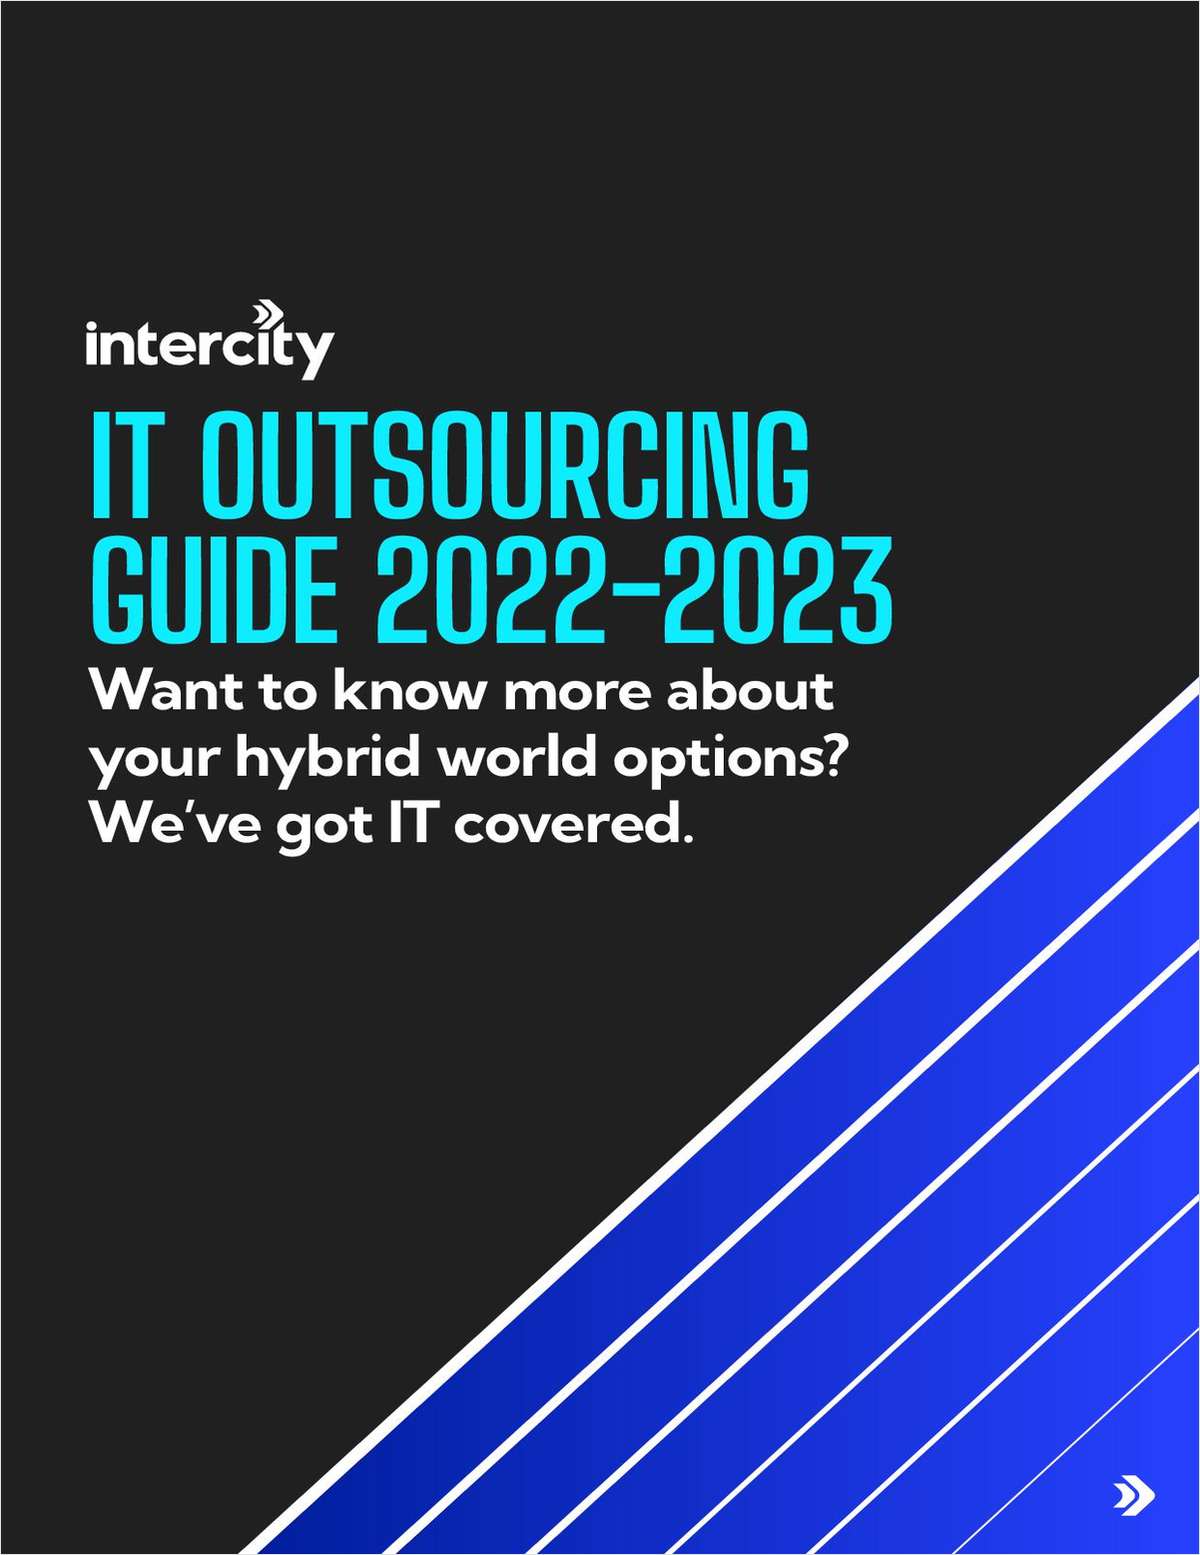 Our Guide to IT outsourcing